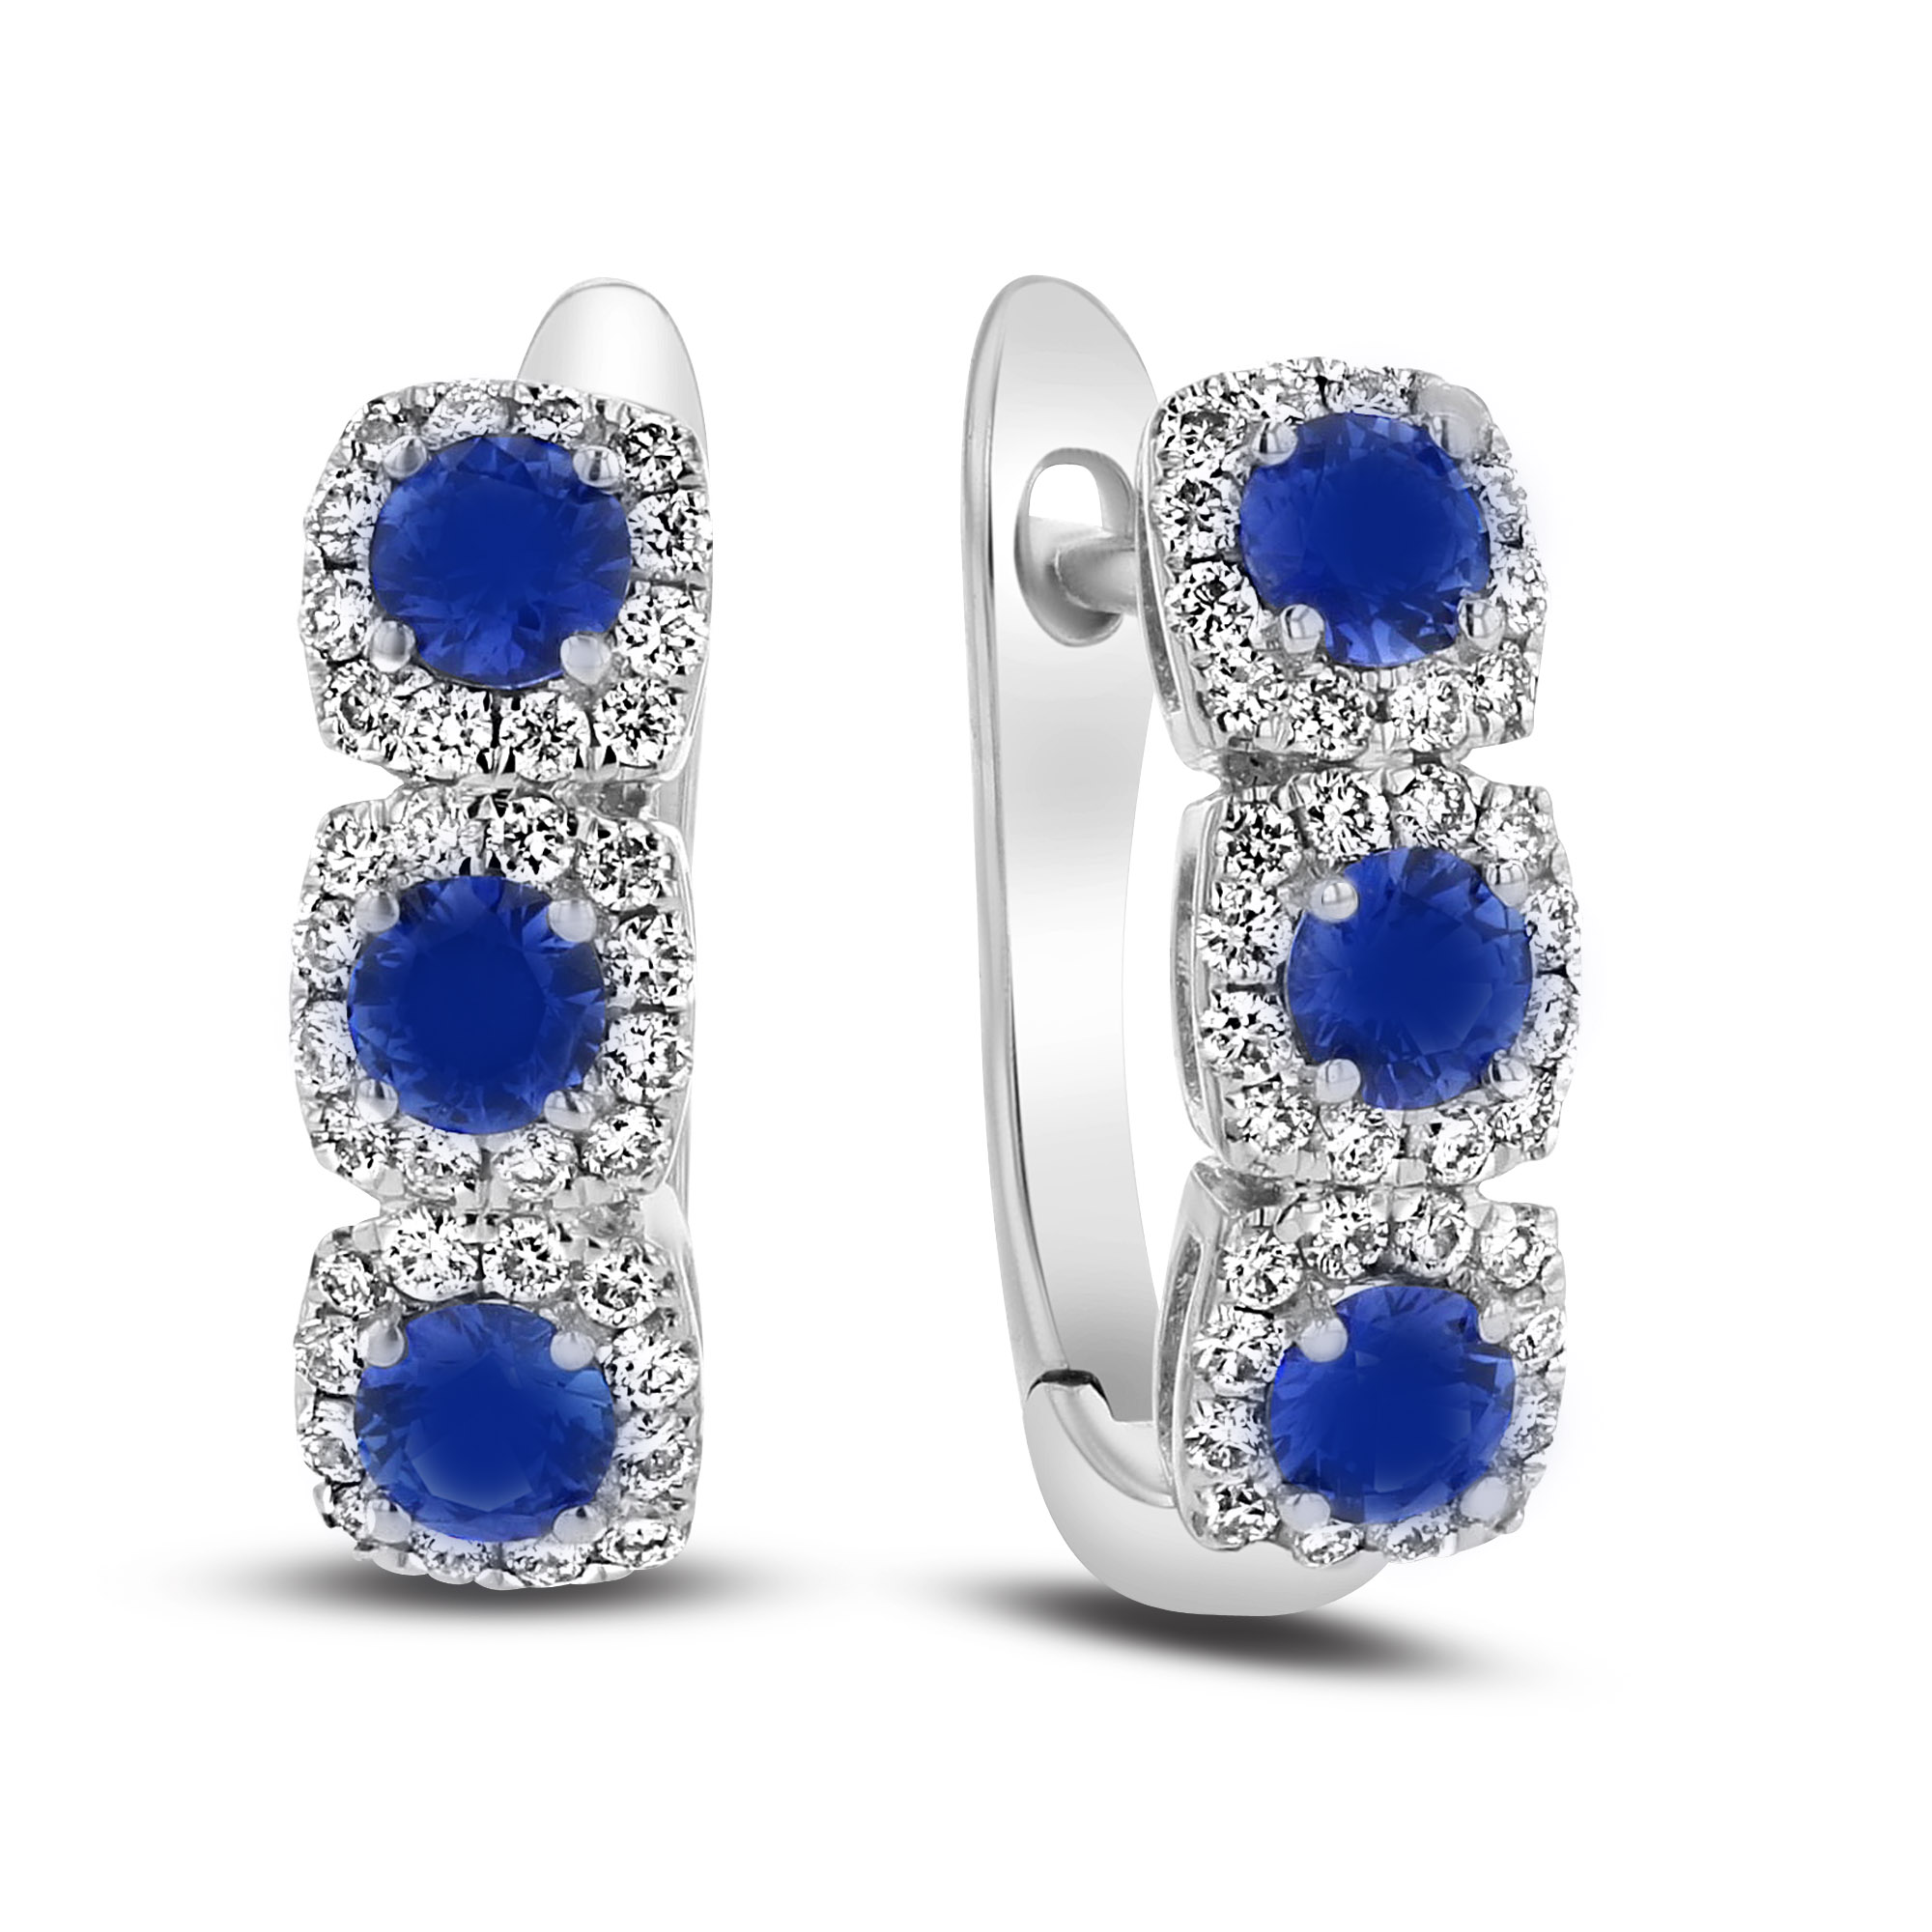 View 0.82ctw Diamond and Sapphire Hoop Earrings in 18k White Gold